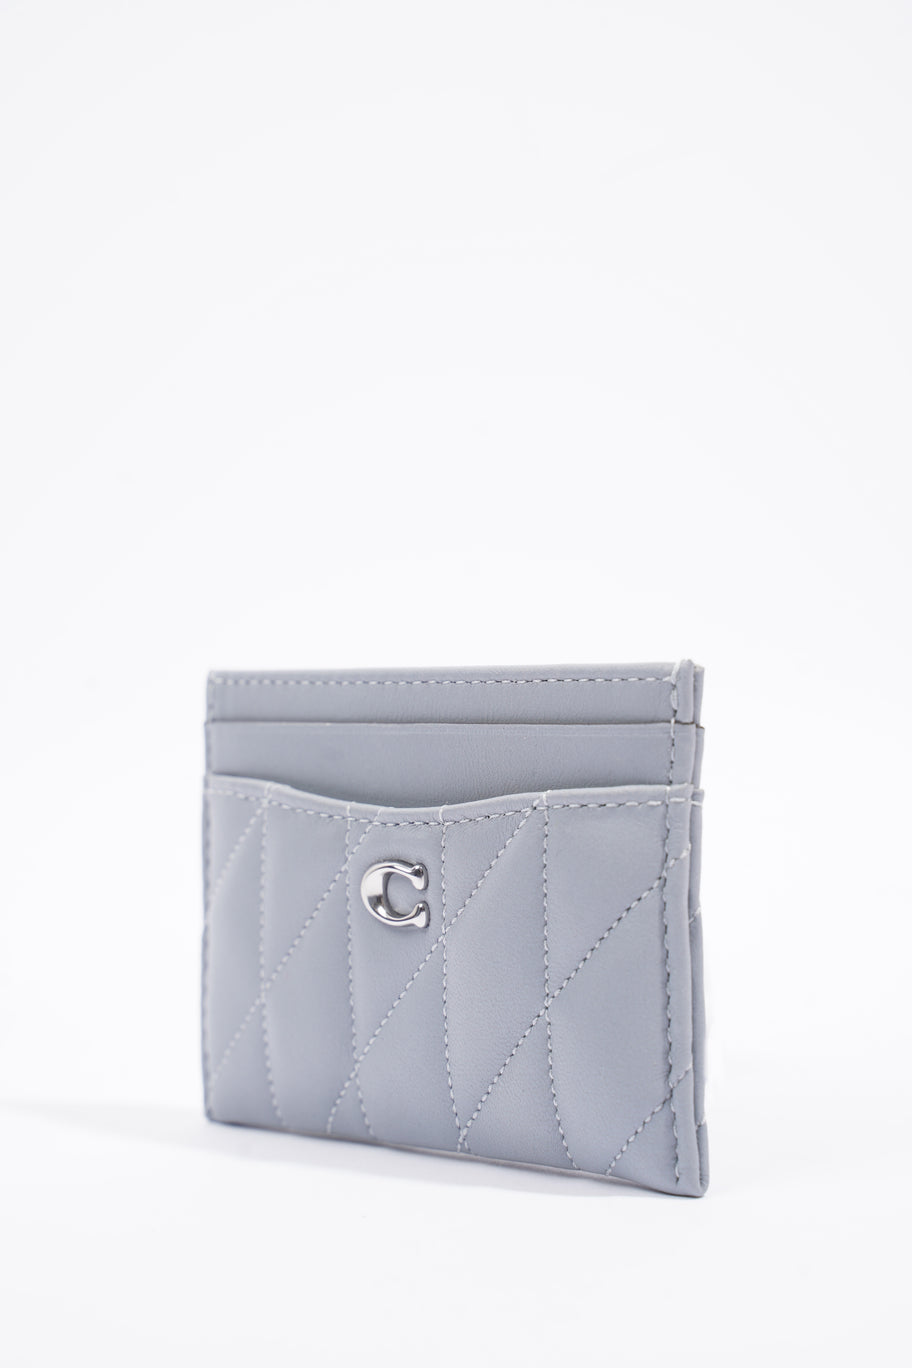 Essential Card Case Grey Lambskin Leather Image 3